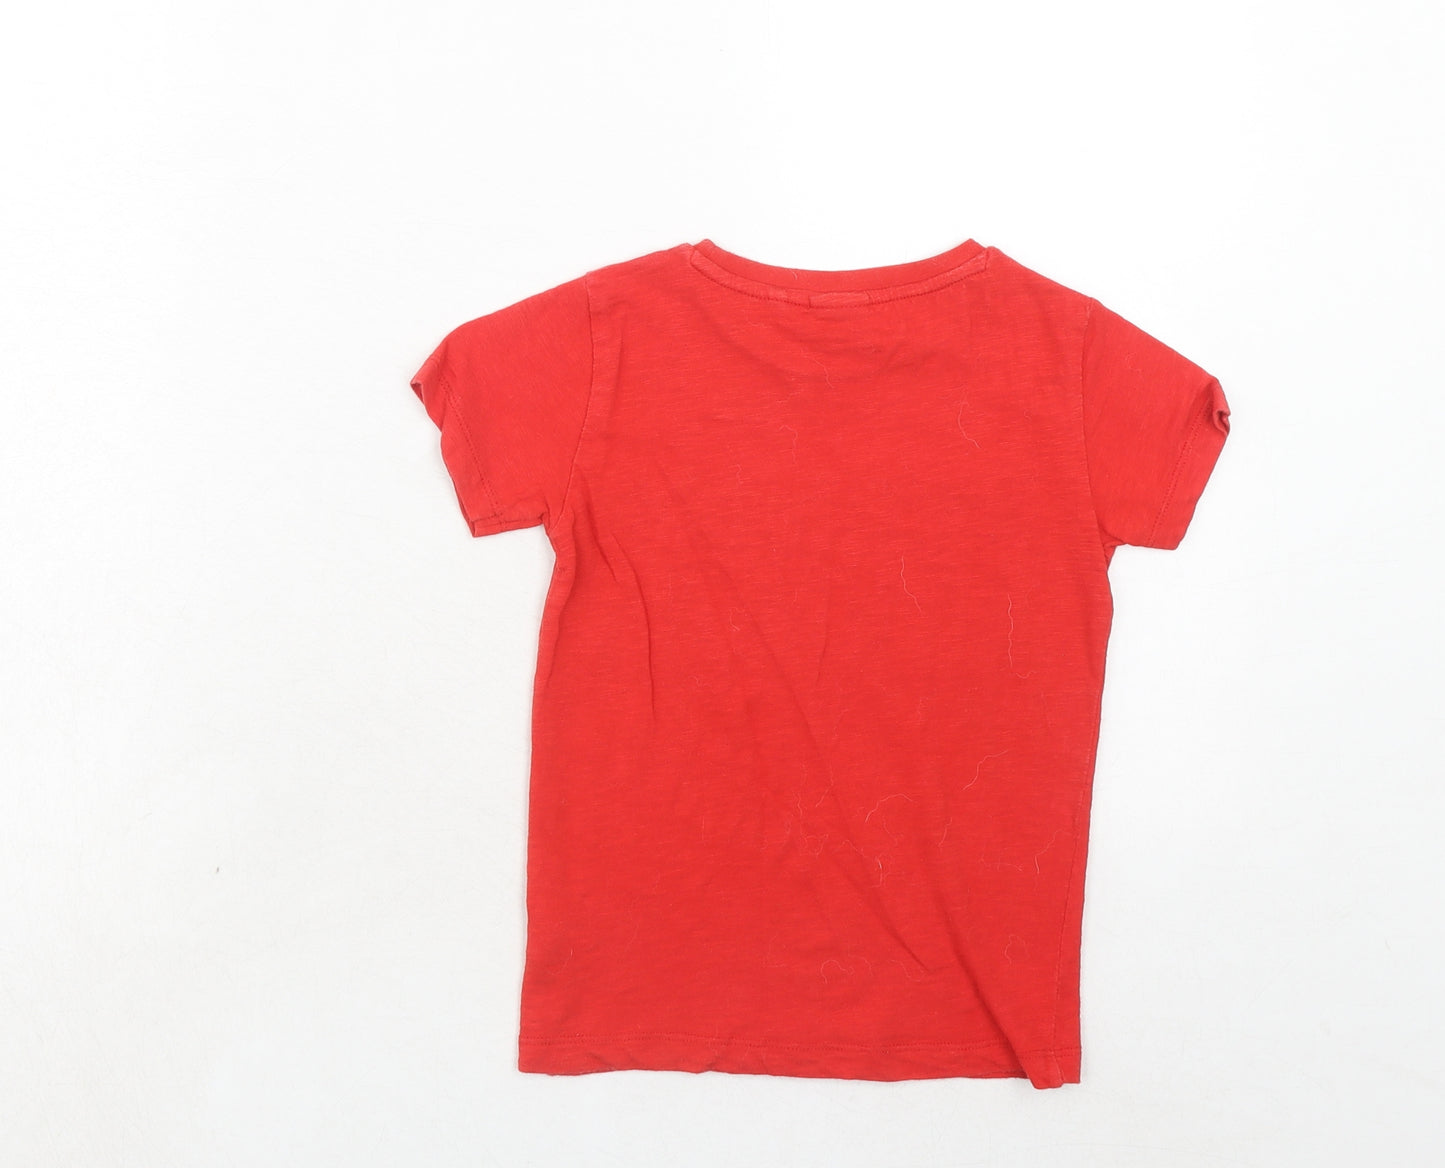 NEXT Boys Red Cotton Pullover T-Shirt Size 3-4 Years Round Neck Pullover - Marvel